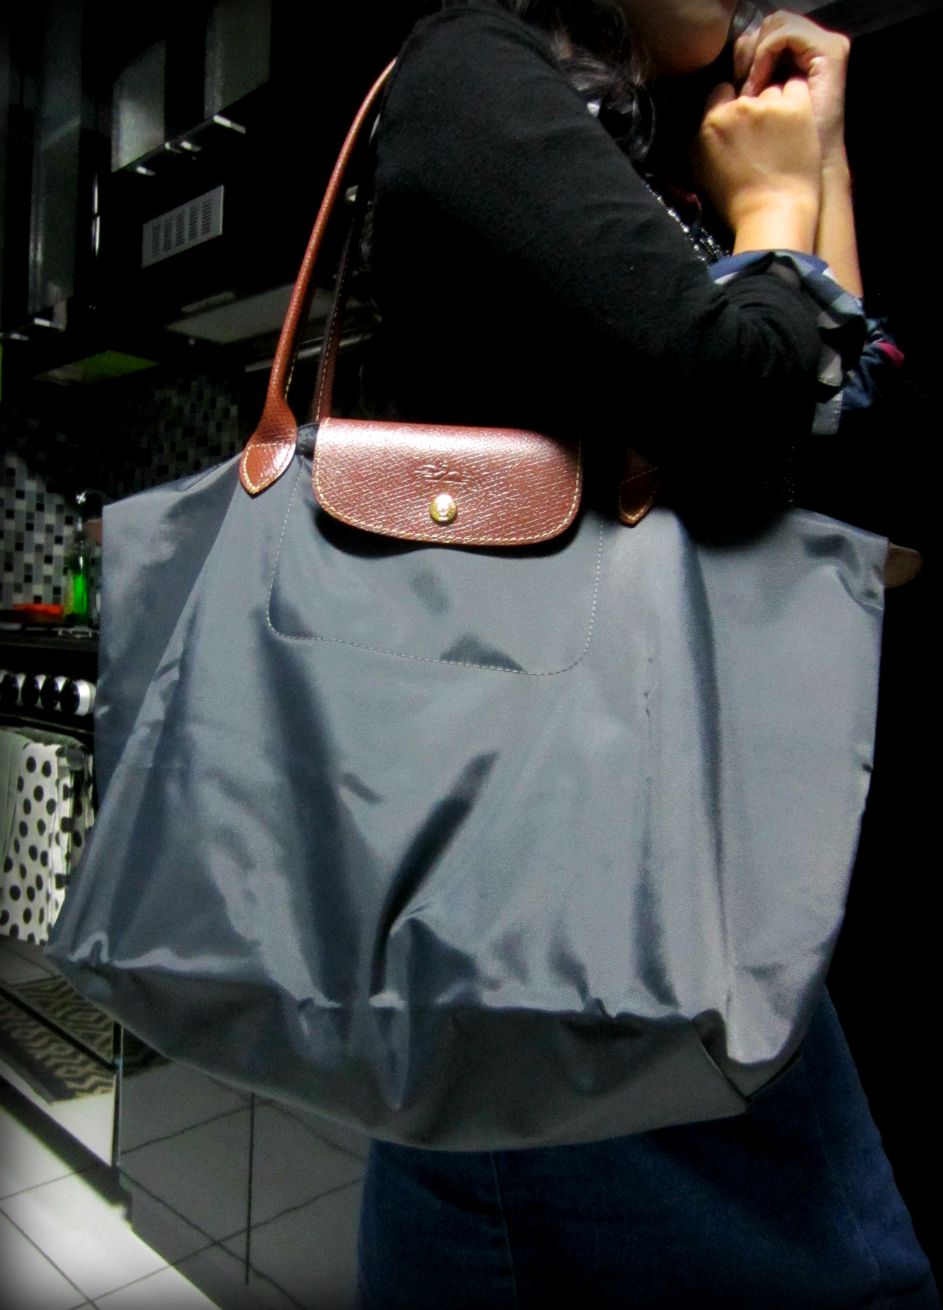 which color longchamp bag is most popular